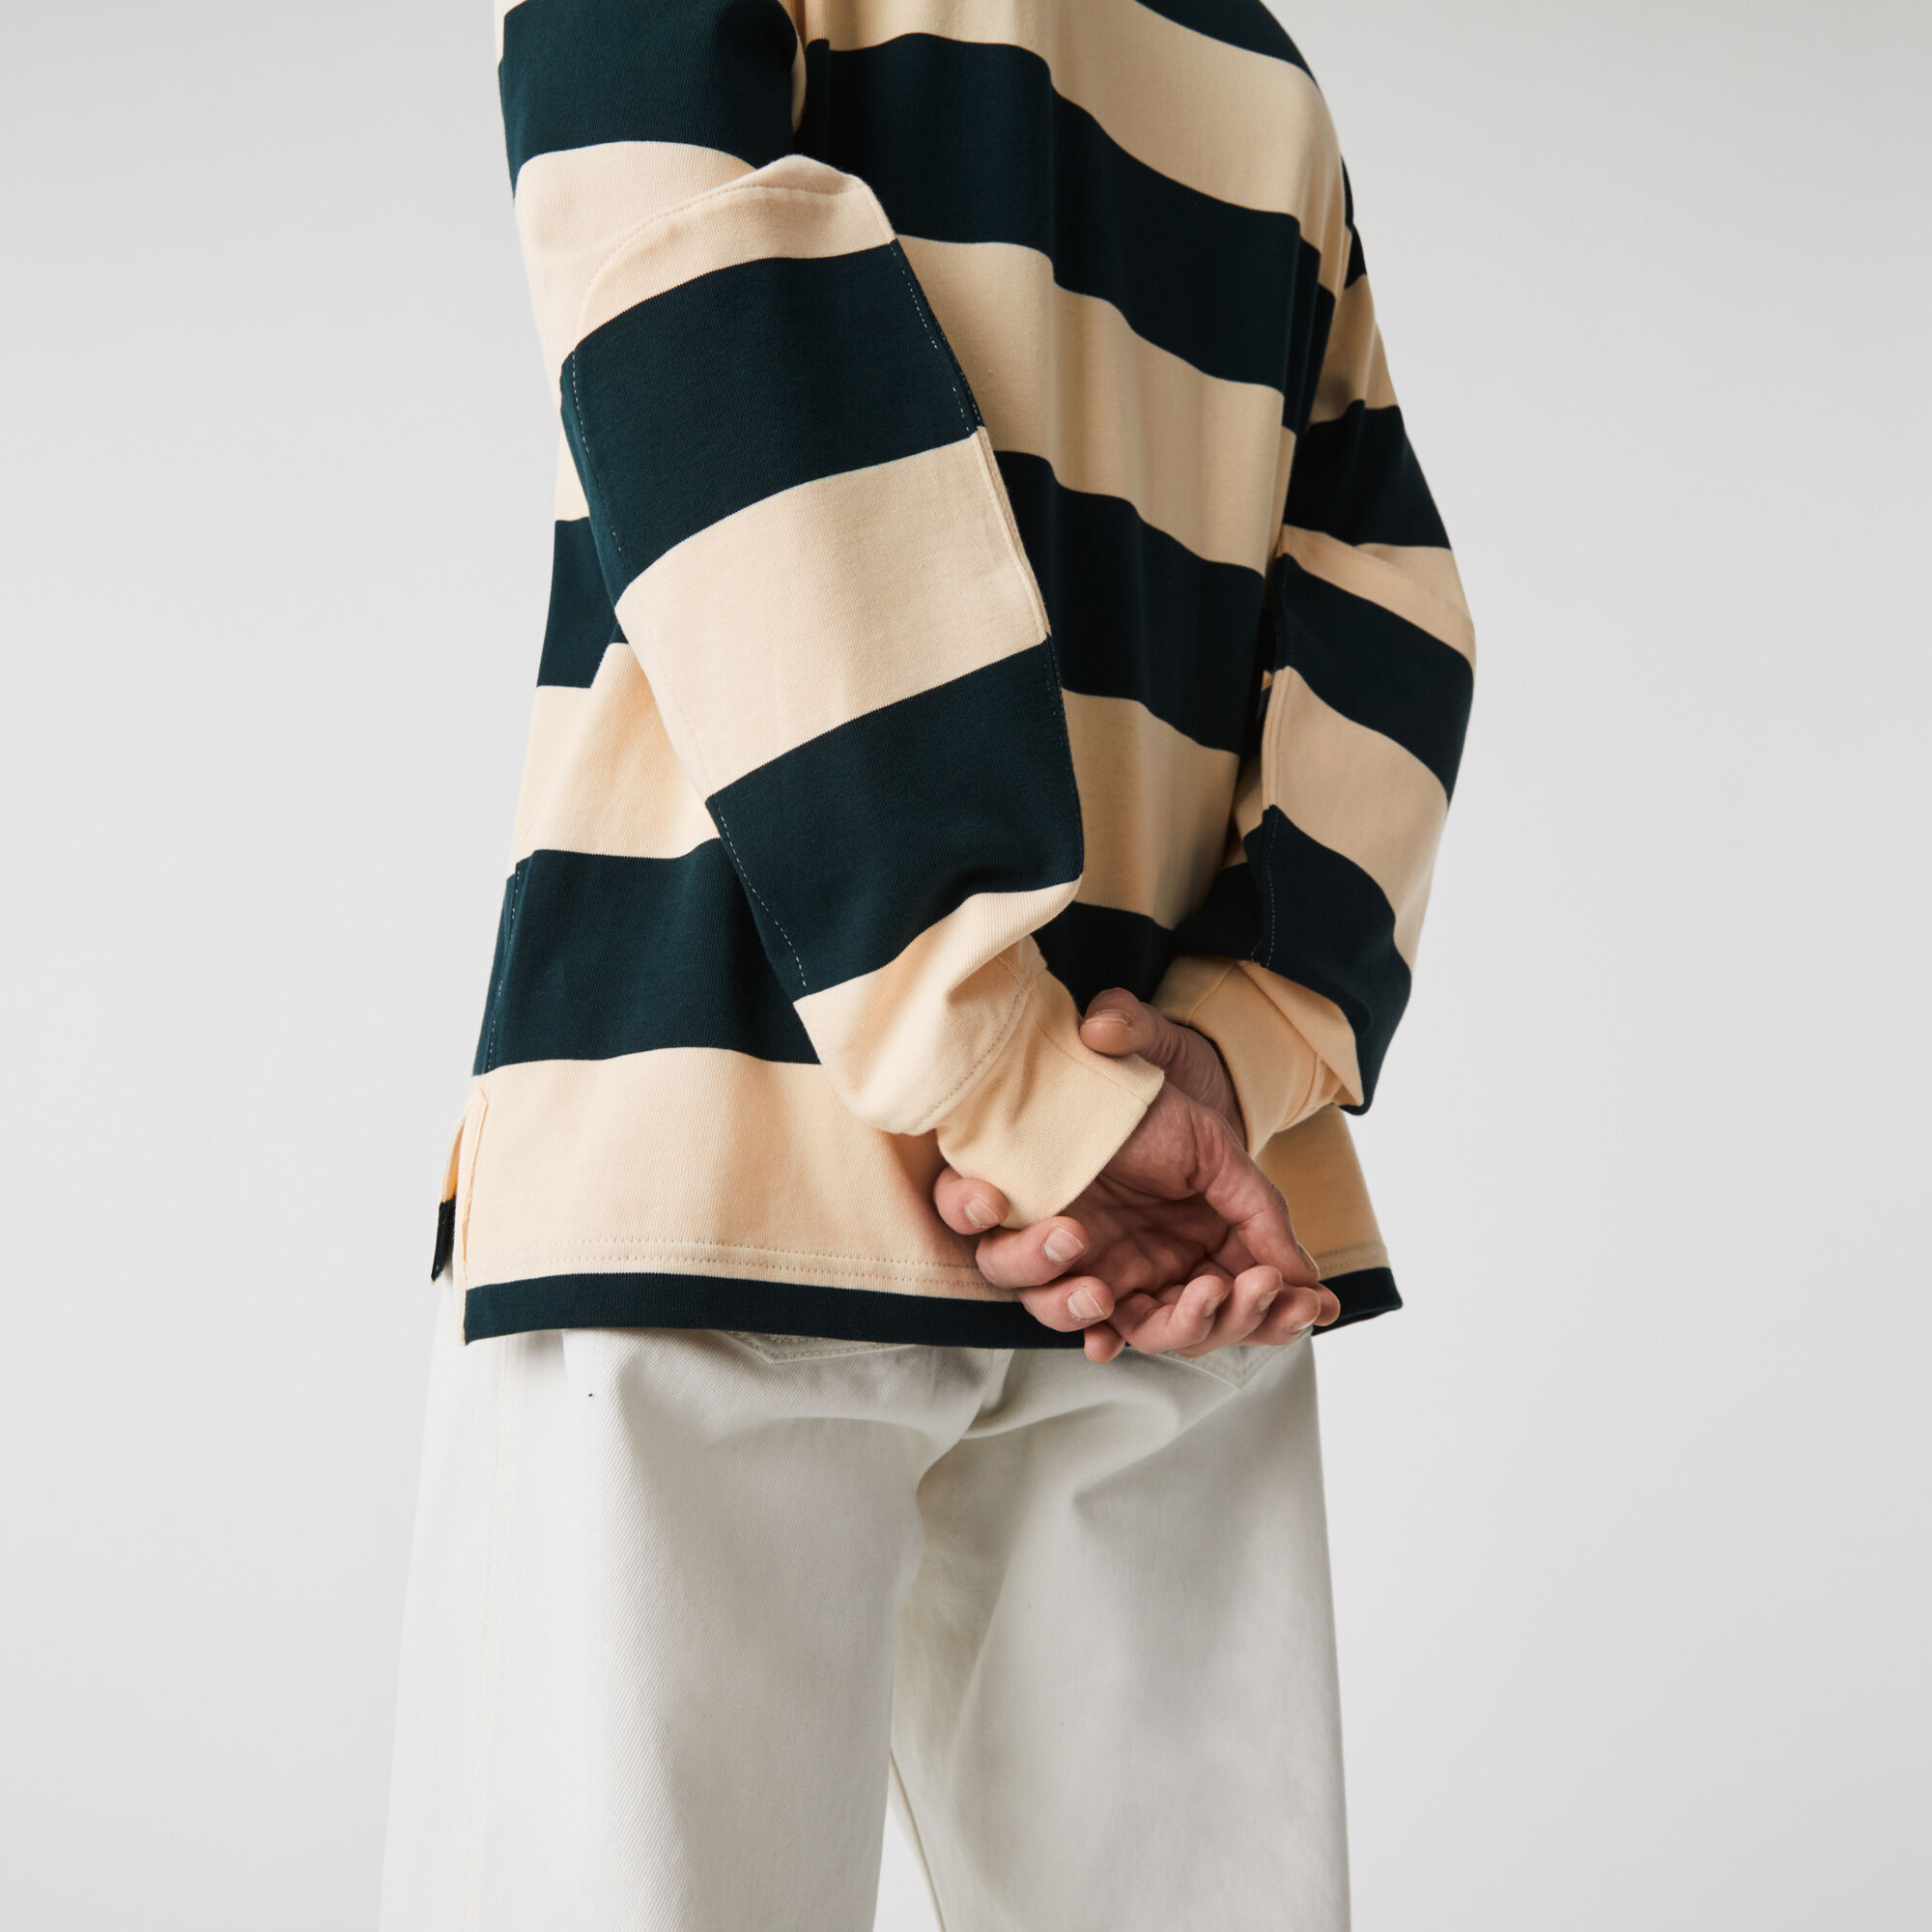 Men’s Lacoste Striped Cotton Rugby Shirt